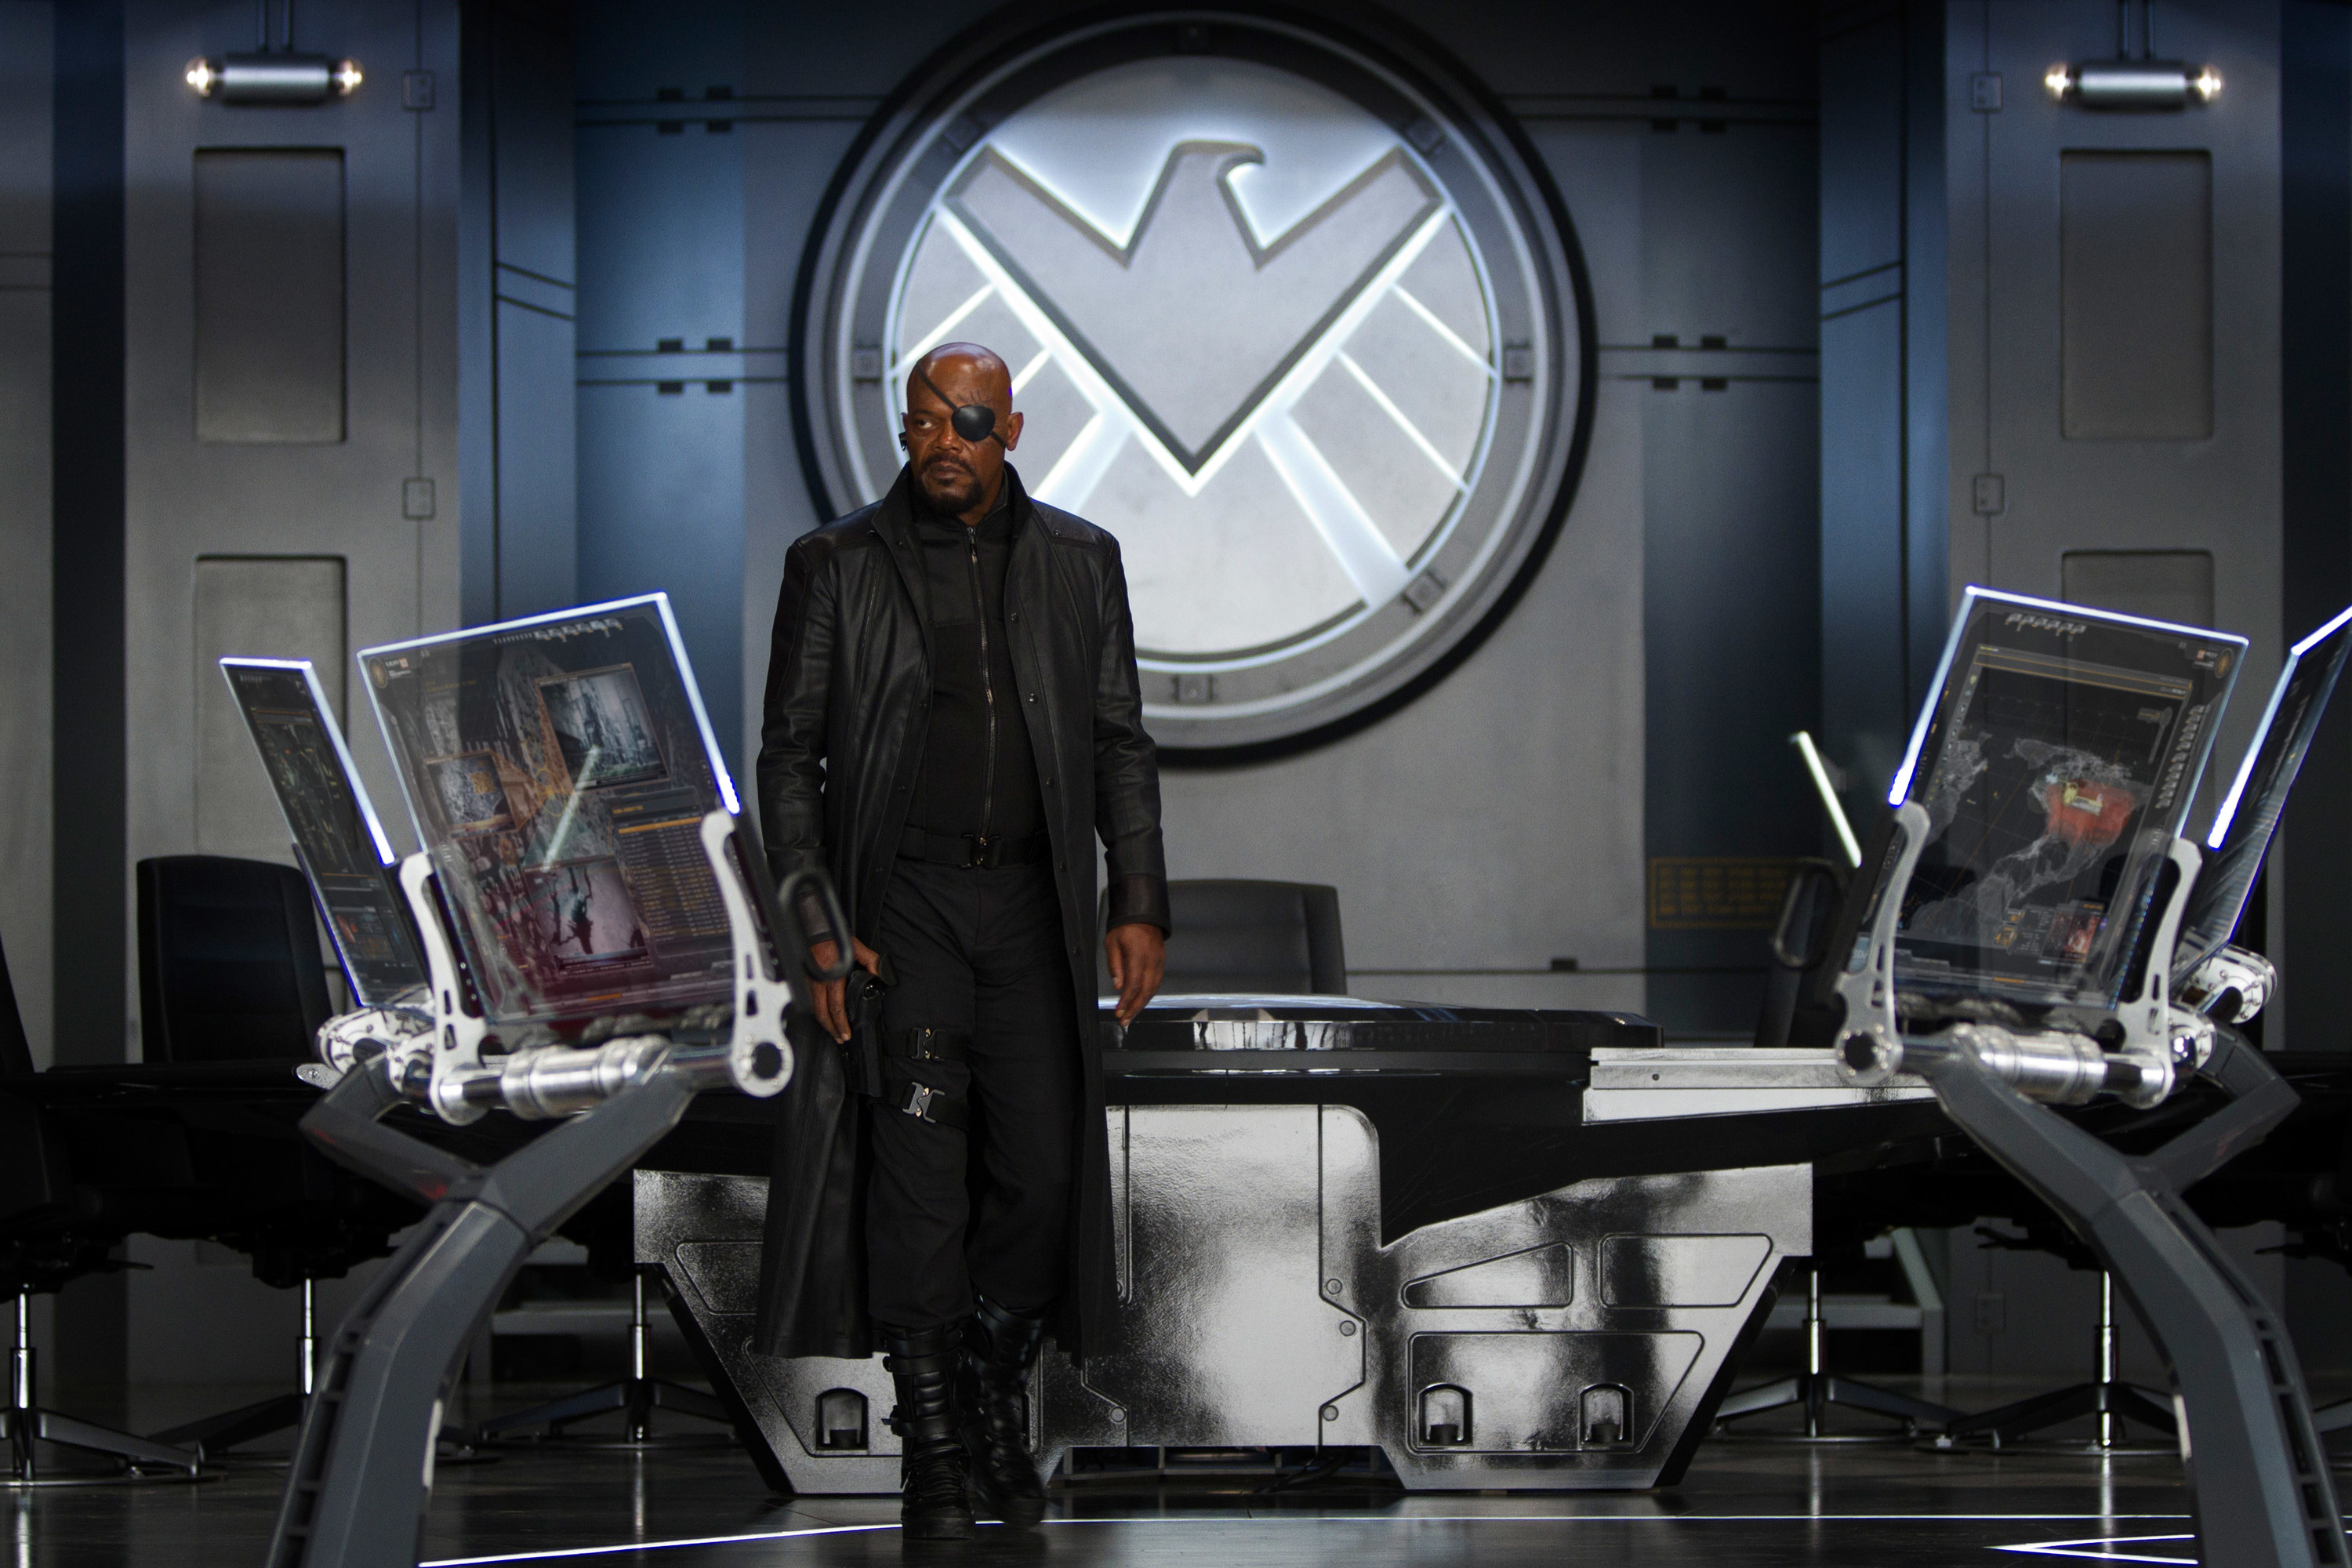 Nick Fury in his classic outfit